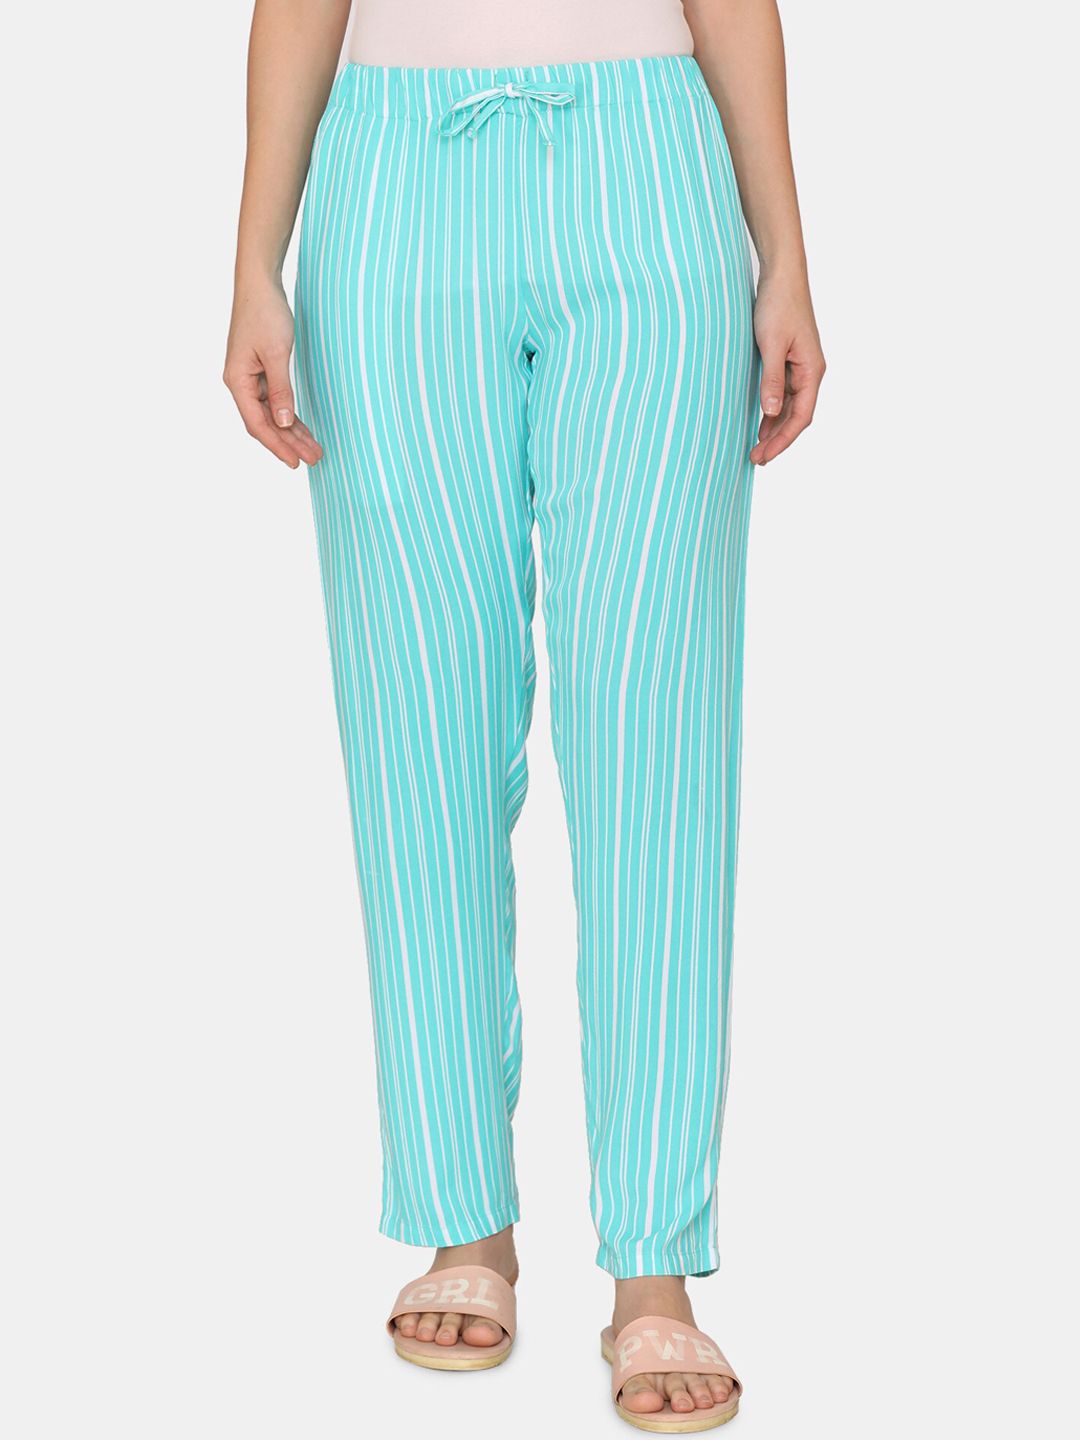 Coucou by Zivame Blue Striped Viscose Rayon Woven Pyjamas Price in India